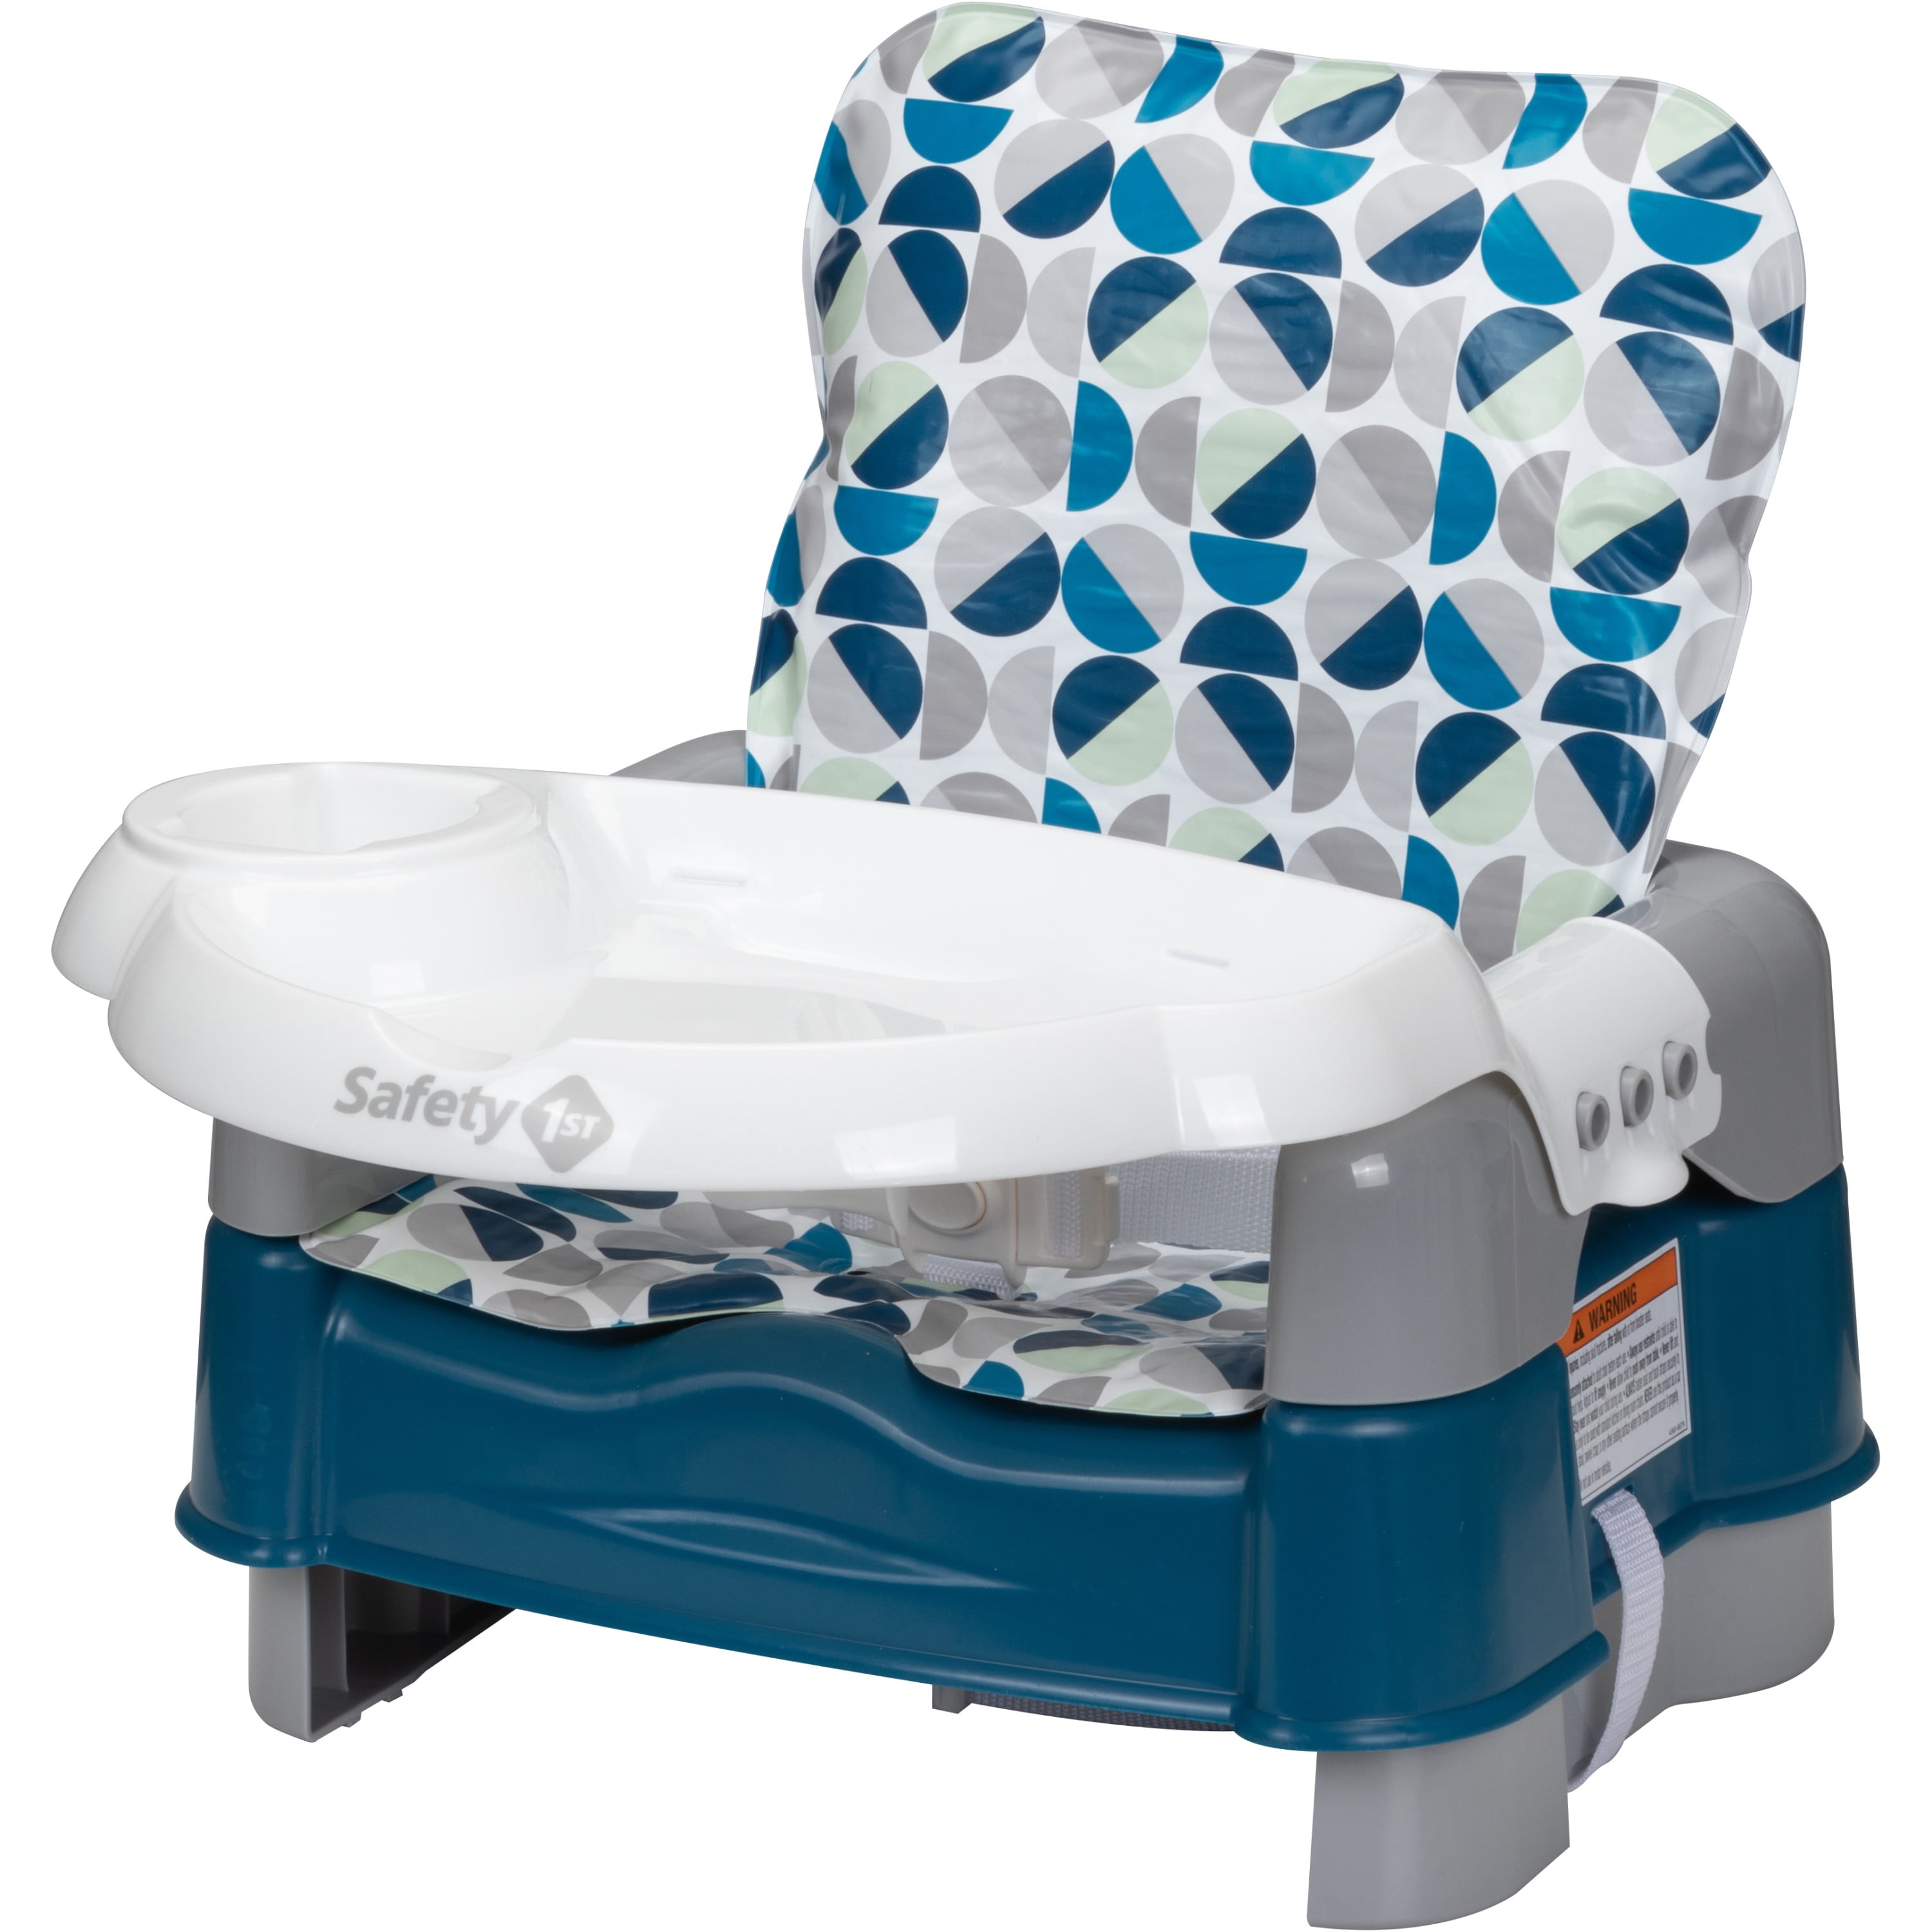 Blue Safety 1st Essential Booster Baby Toddler Seat Chair NEW 